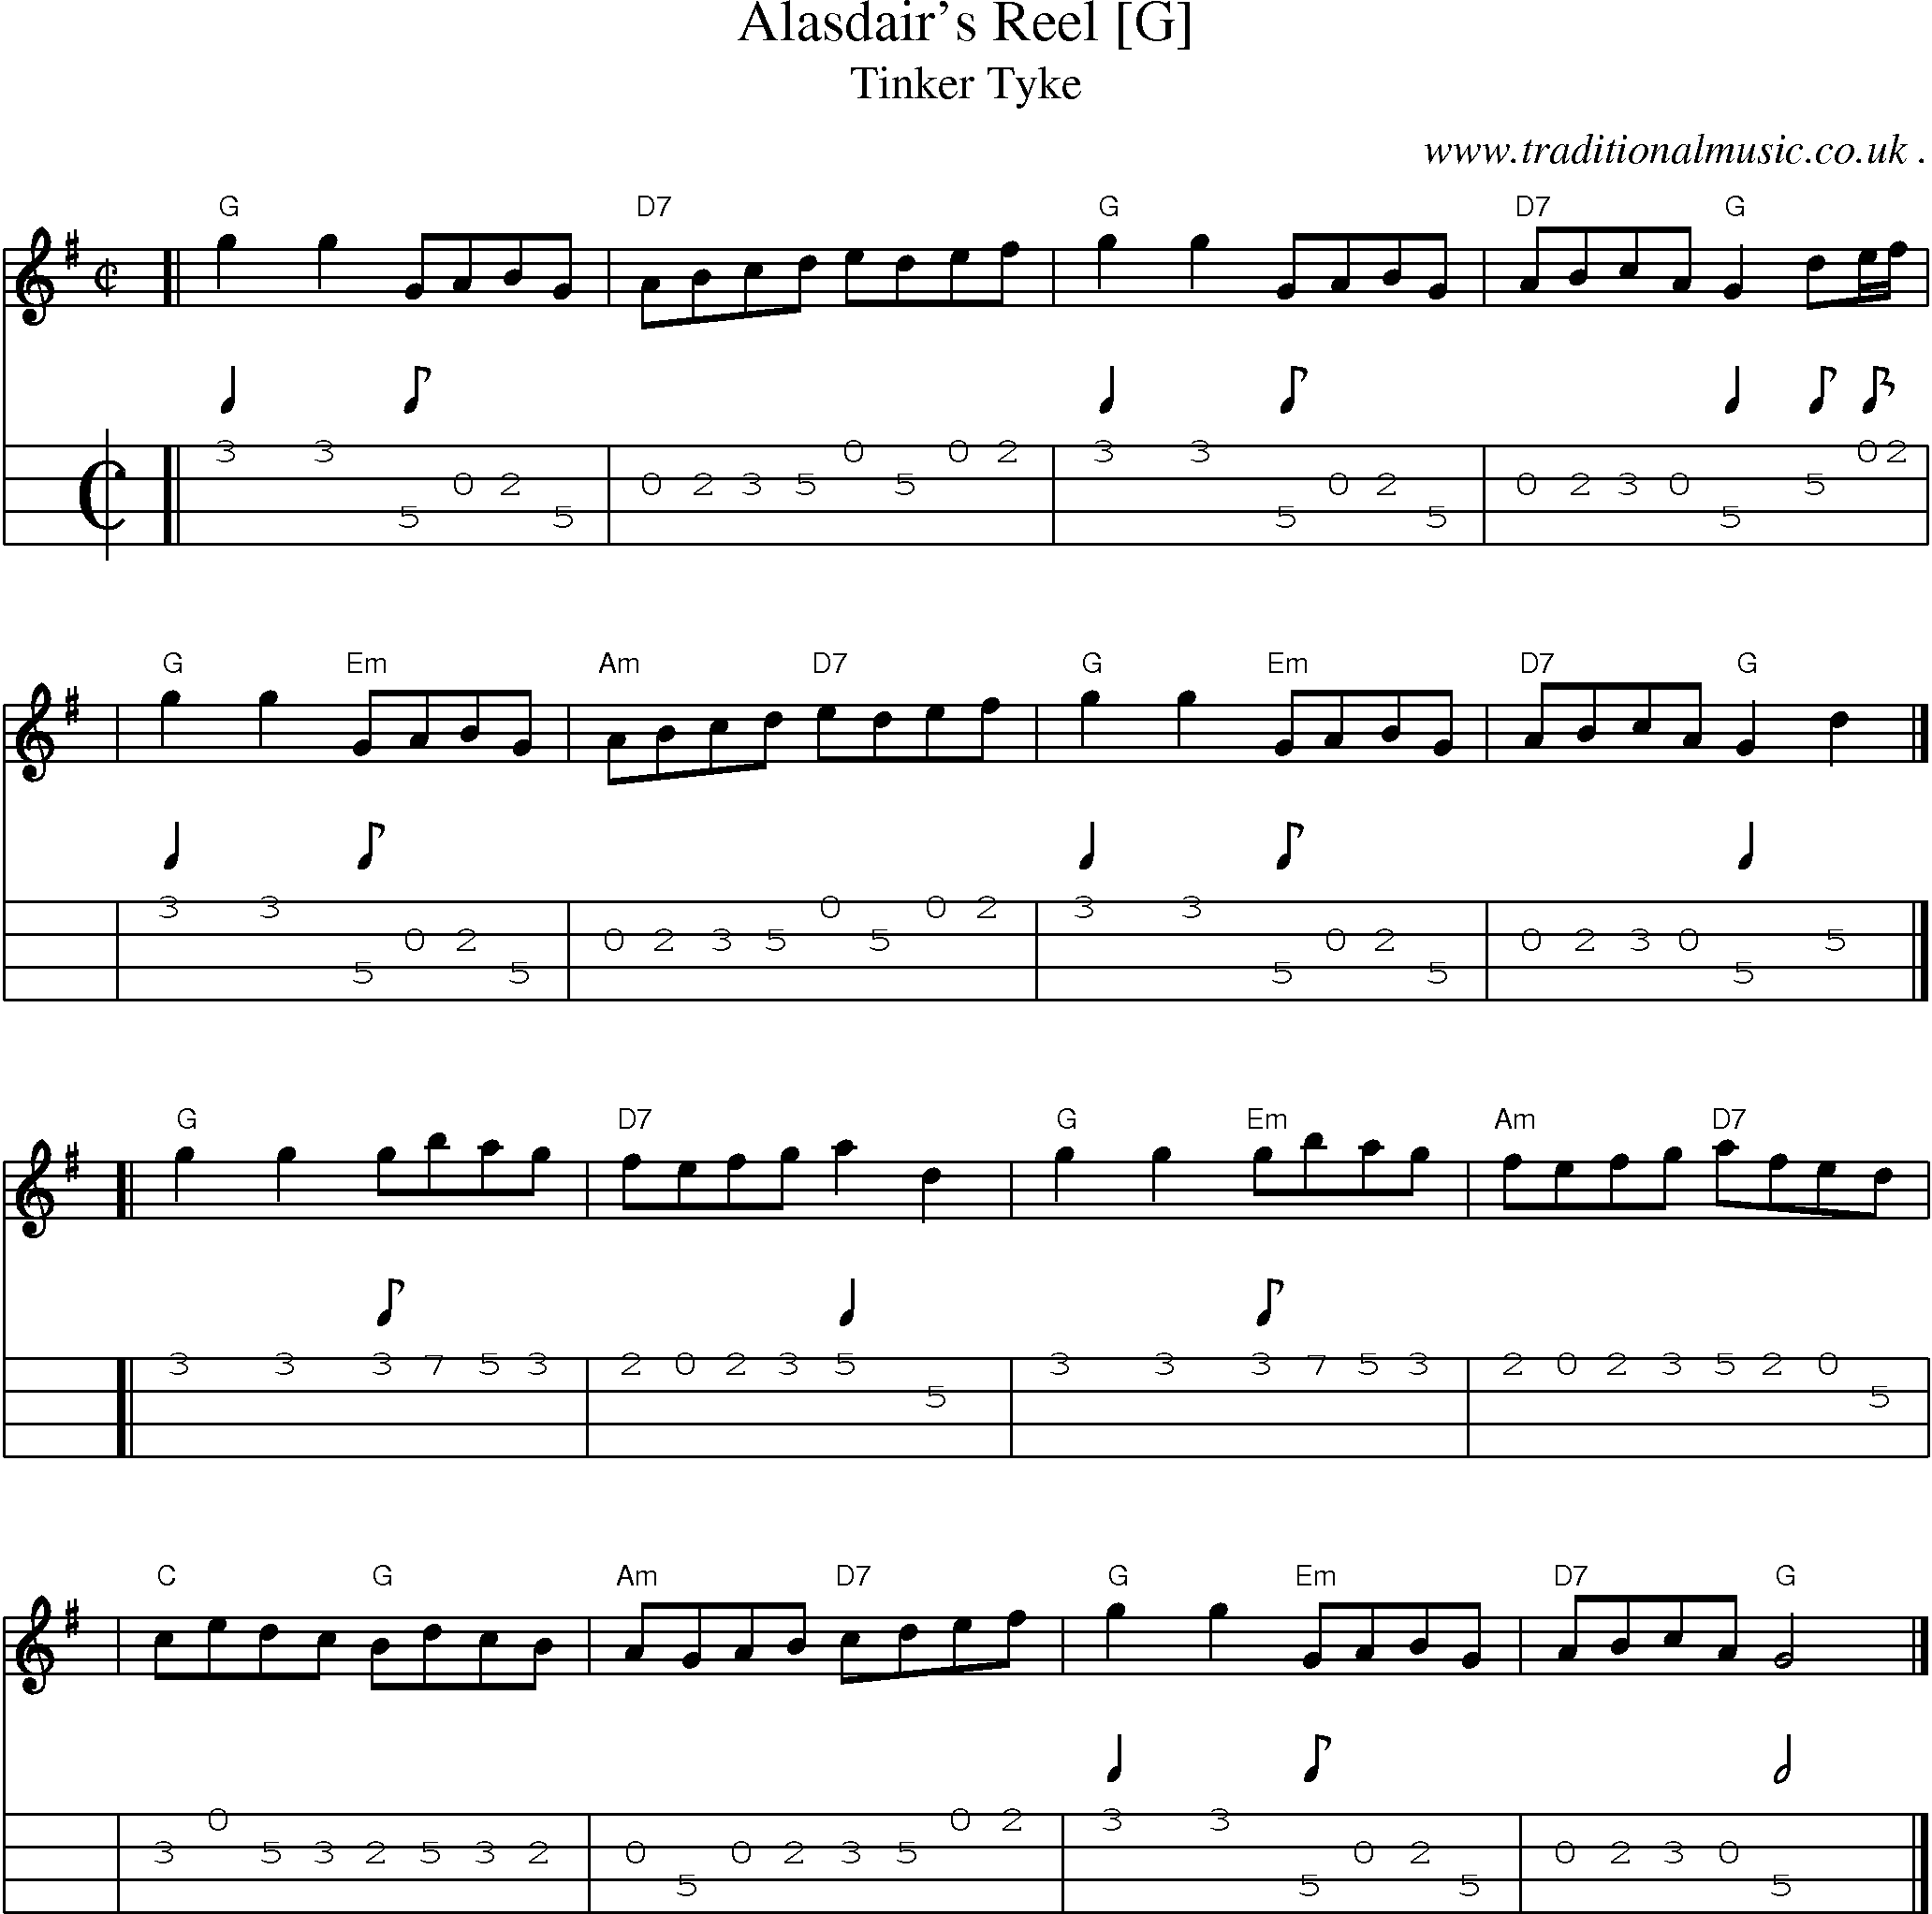 Sheet-music  score, Chords and Mandolin Tabs for Alasdairs Reel [g]